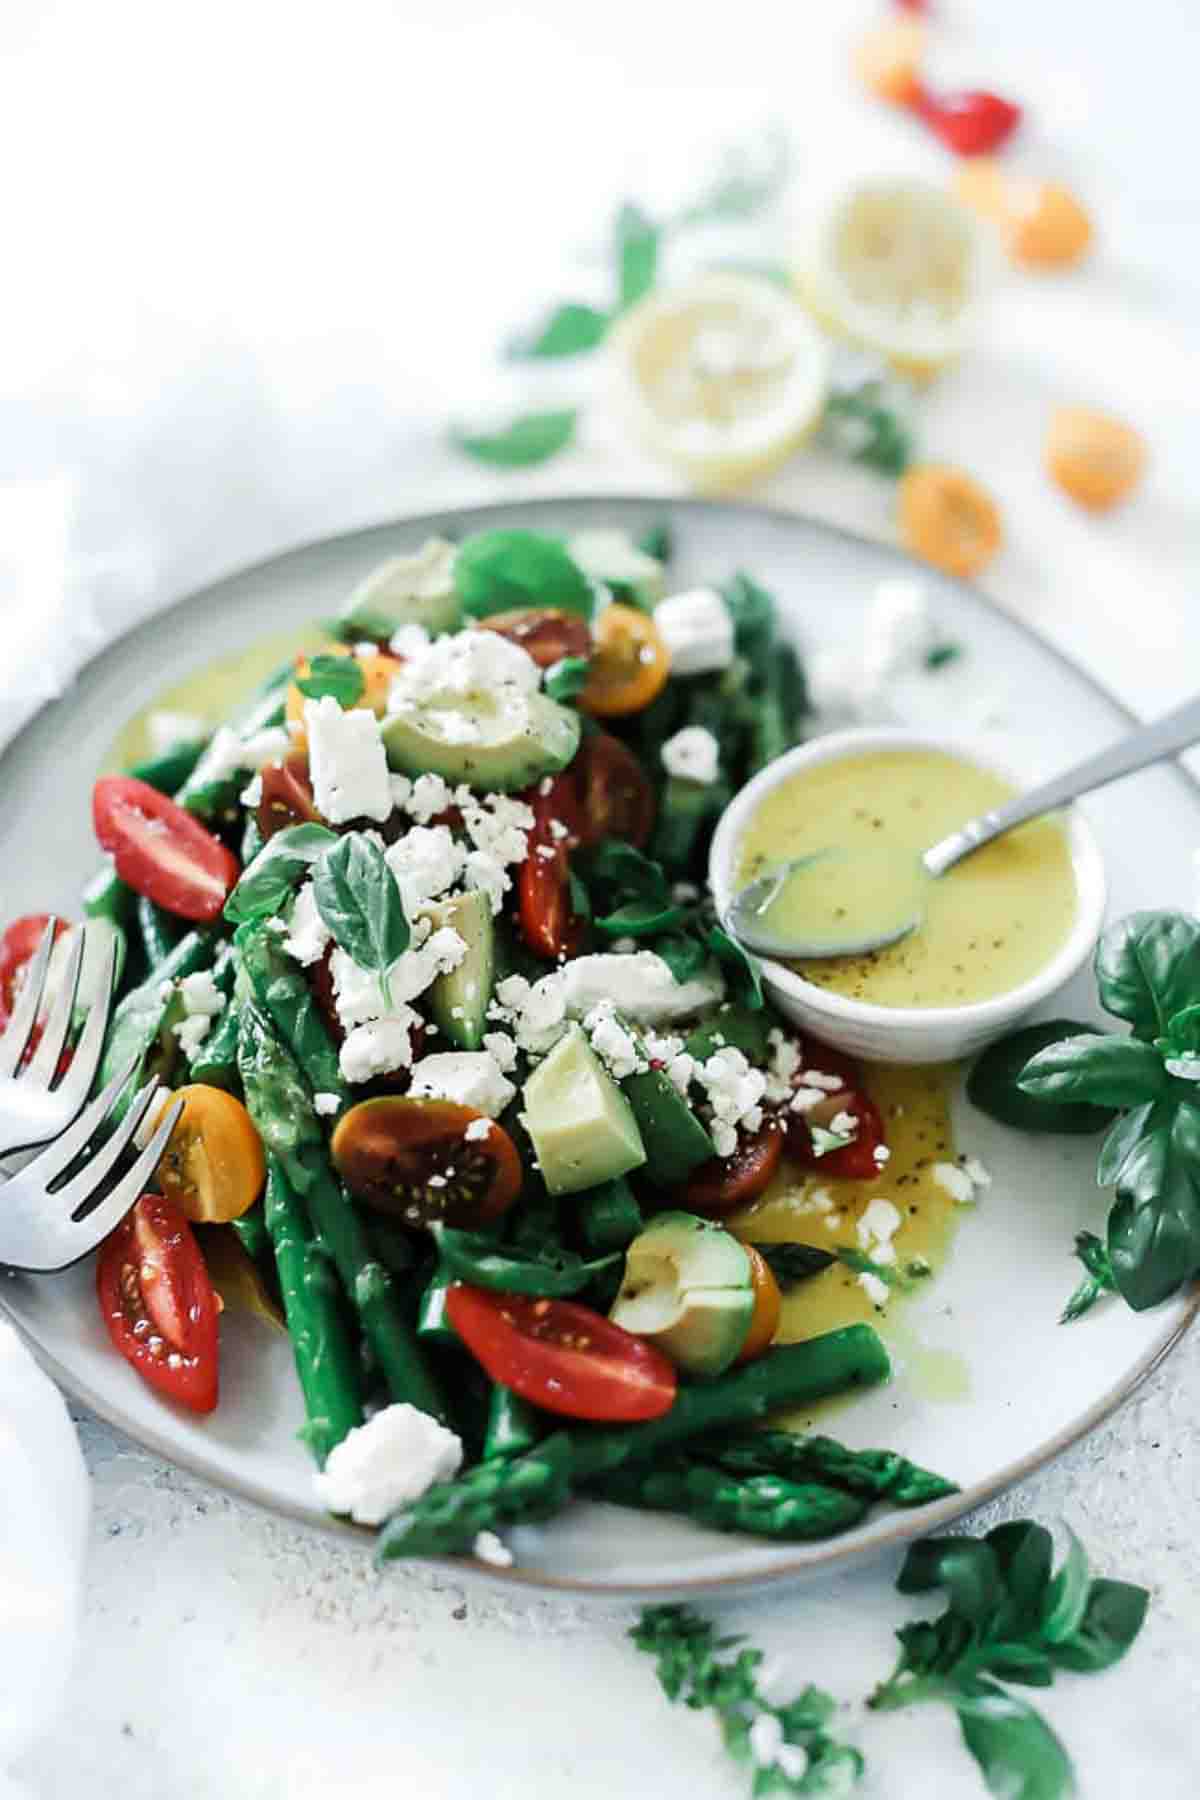 A ¾ angle shot of asparagus salad on a white plate. The salad includes asparagus, tomato, avocado and feta cheese. It is garnished with basil and has a small bowl of dressing to the side.